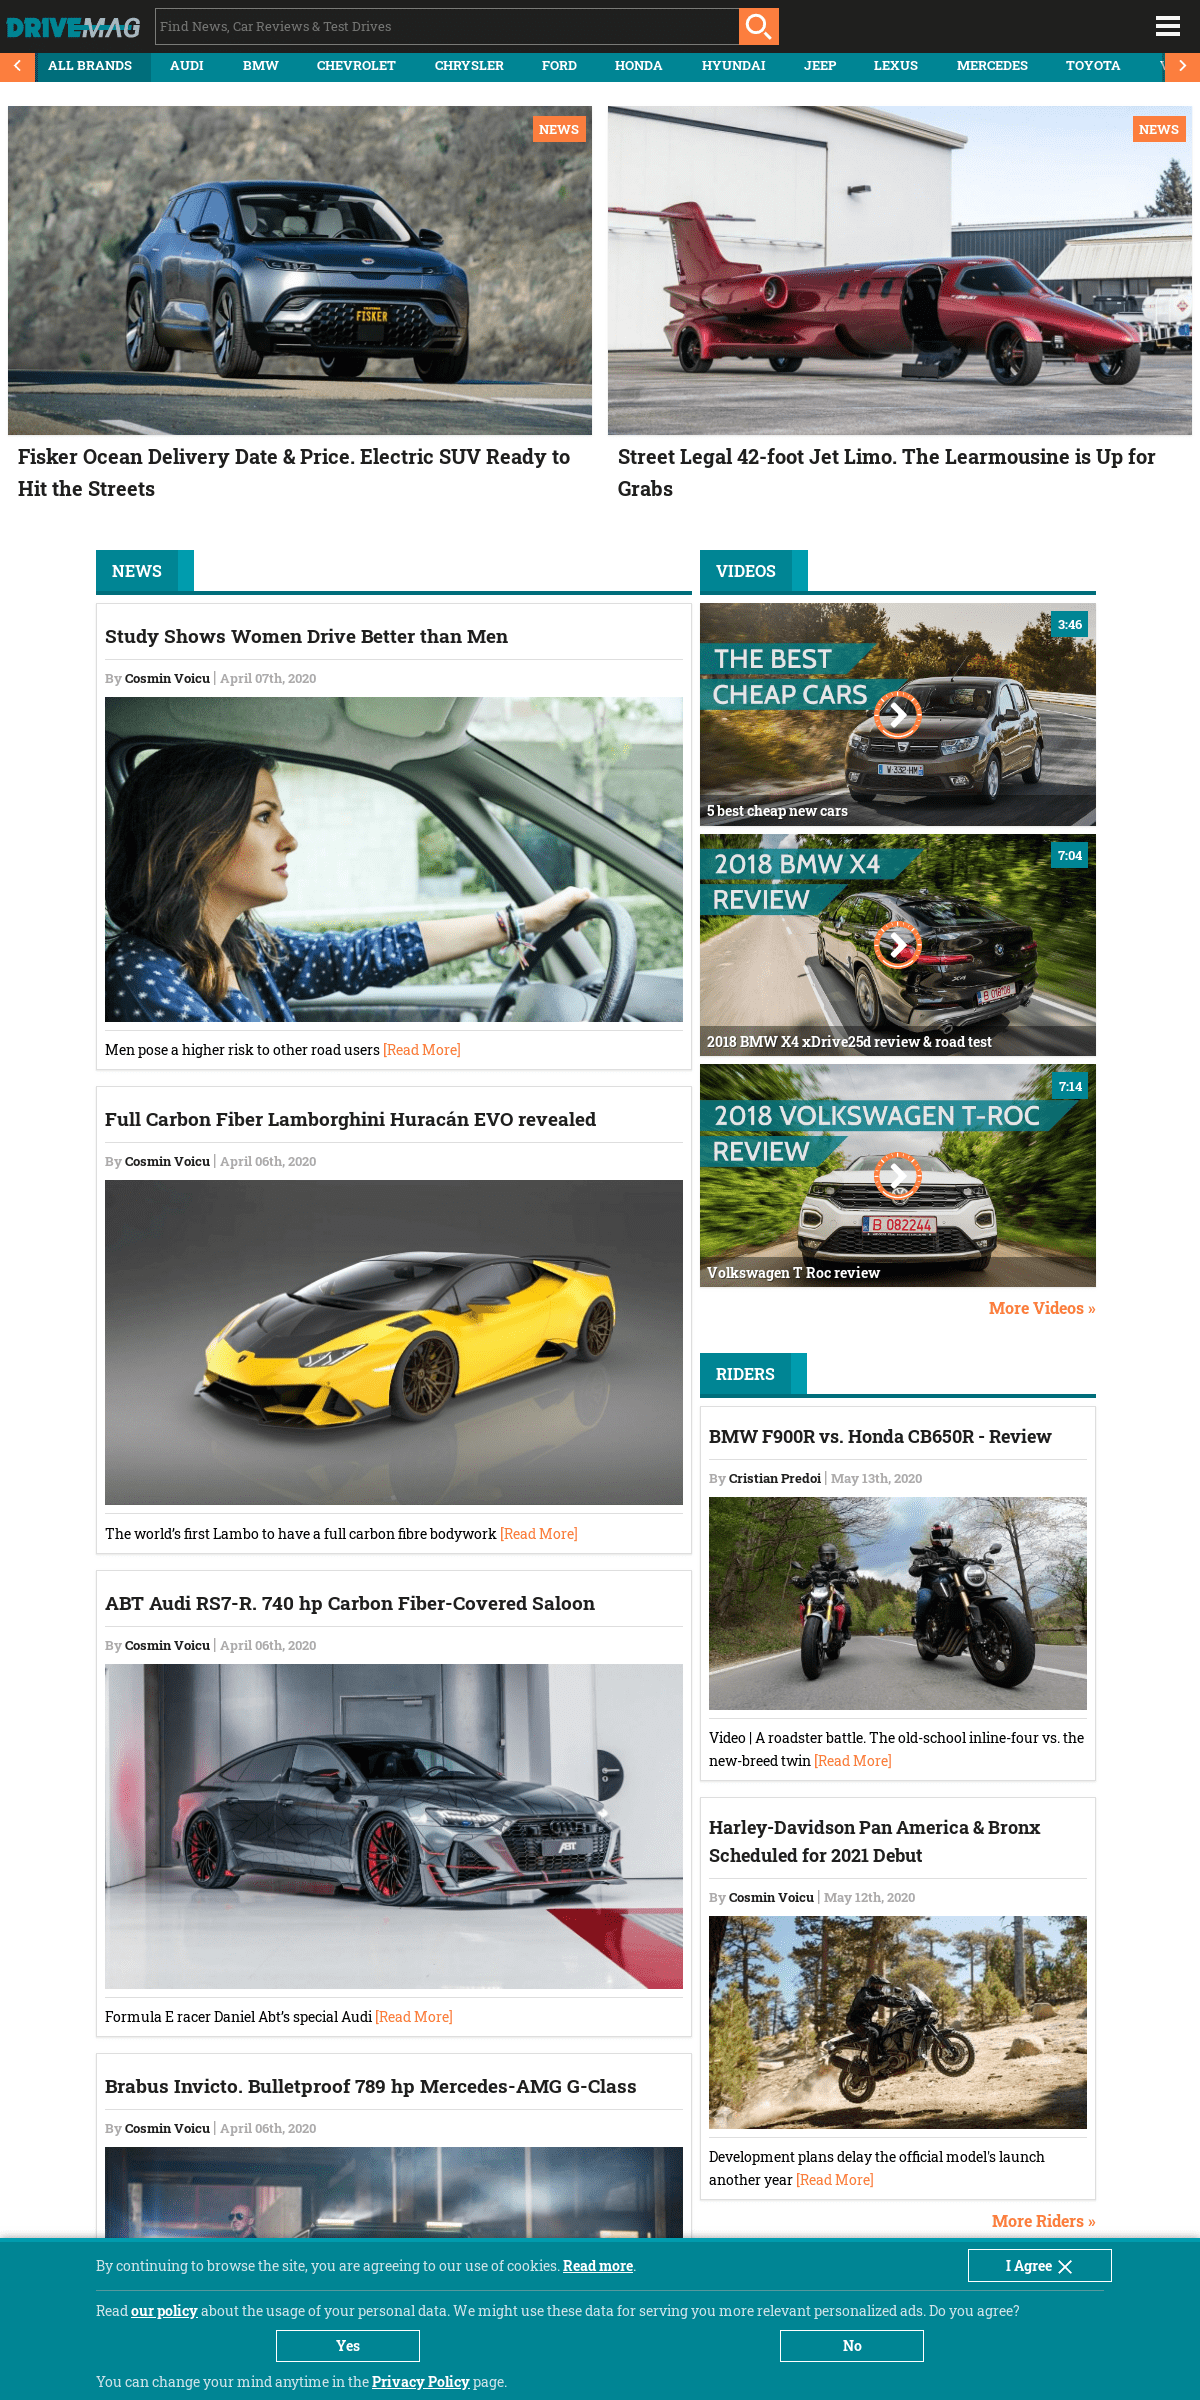 A complete backup of drivemag.com